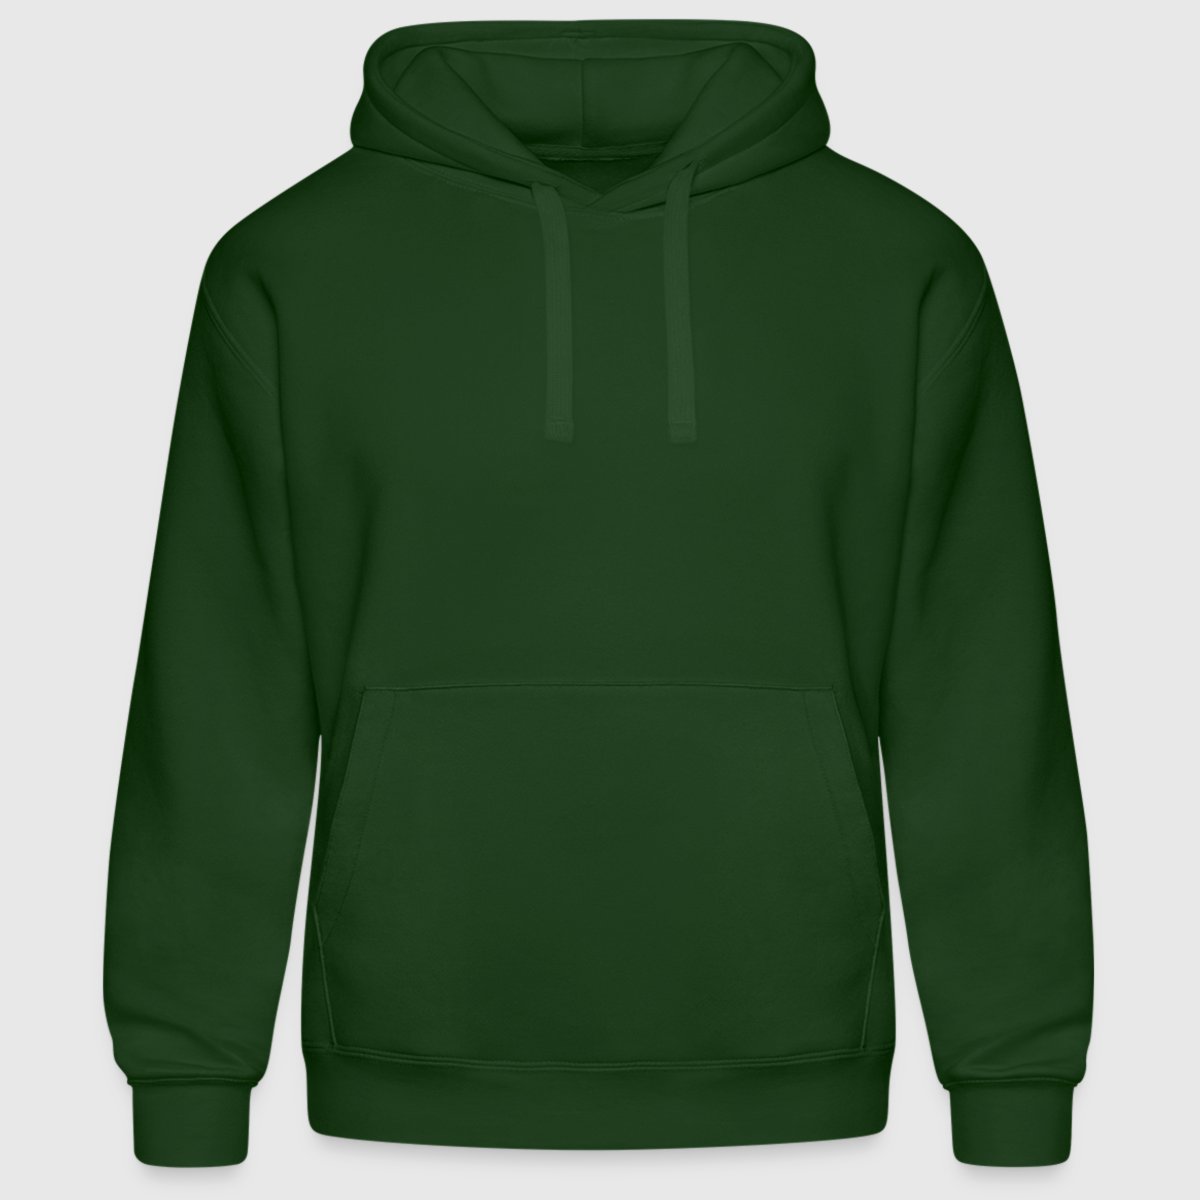 Men’s Hooded Sweater by Russell - Front